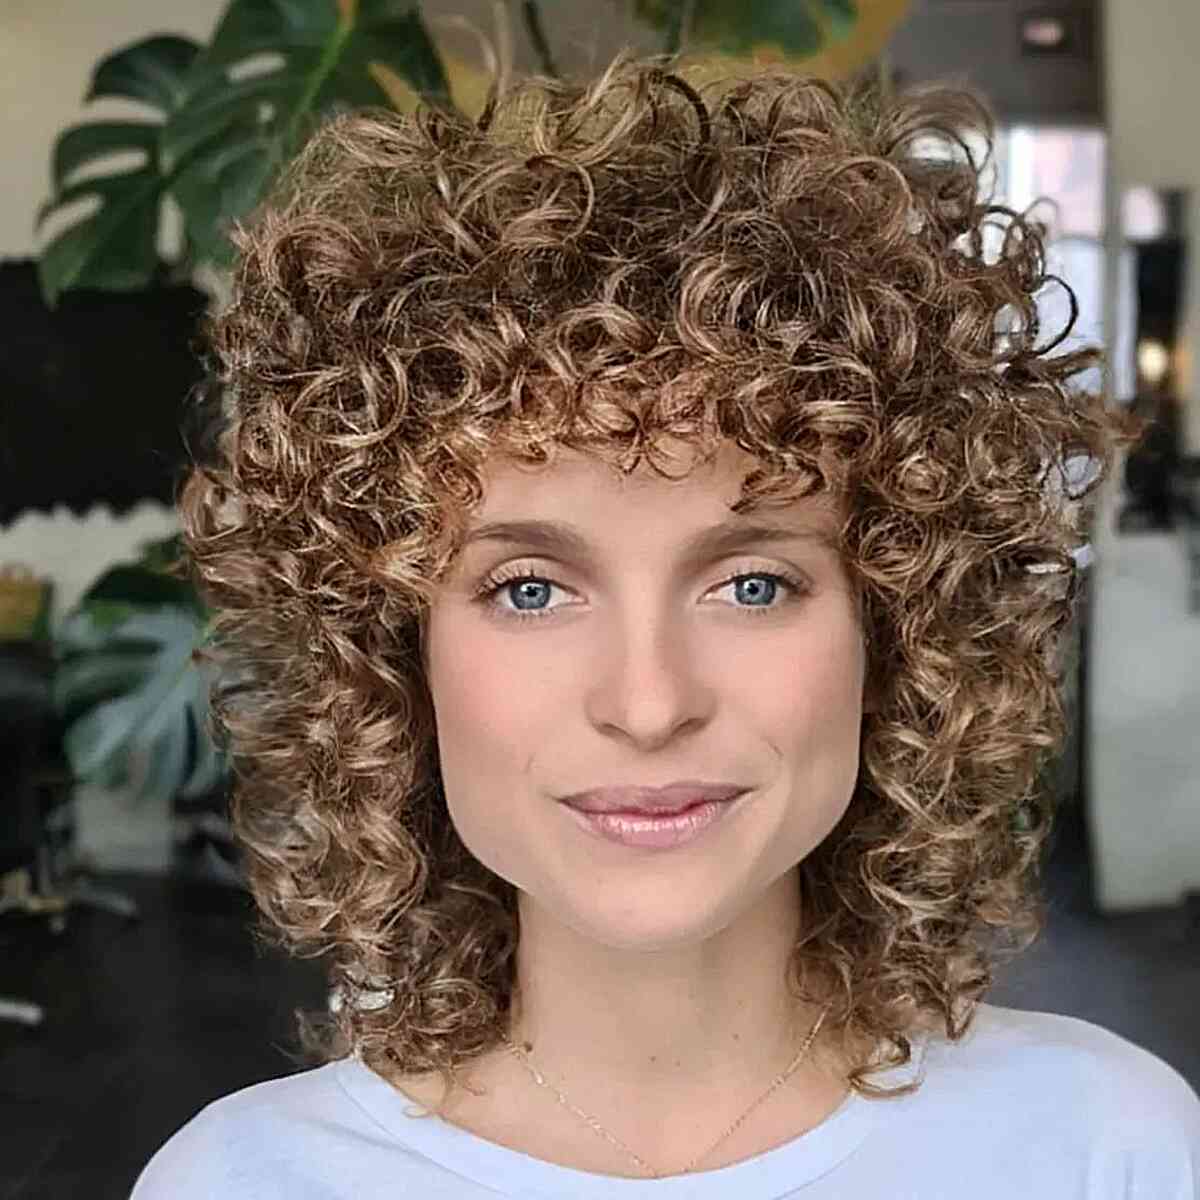 Face-Framing Bangs for Curly Hair and Square Faces